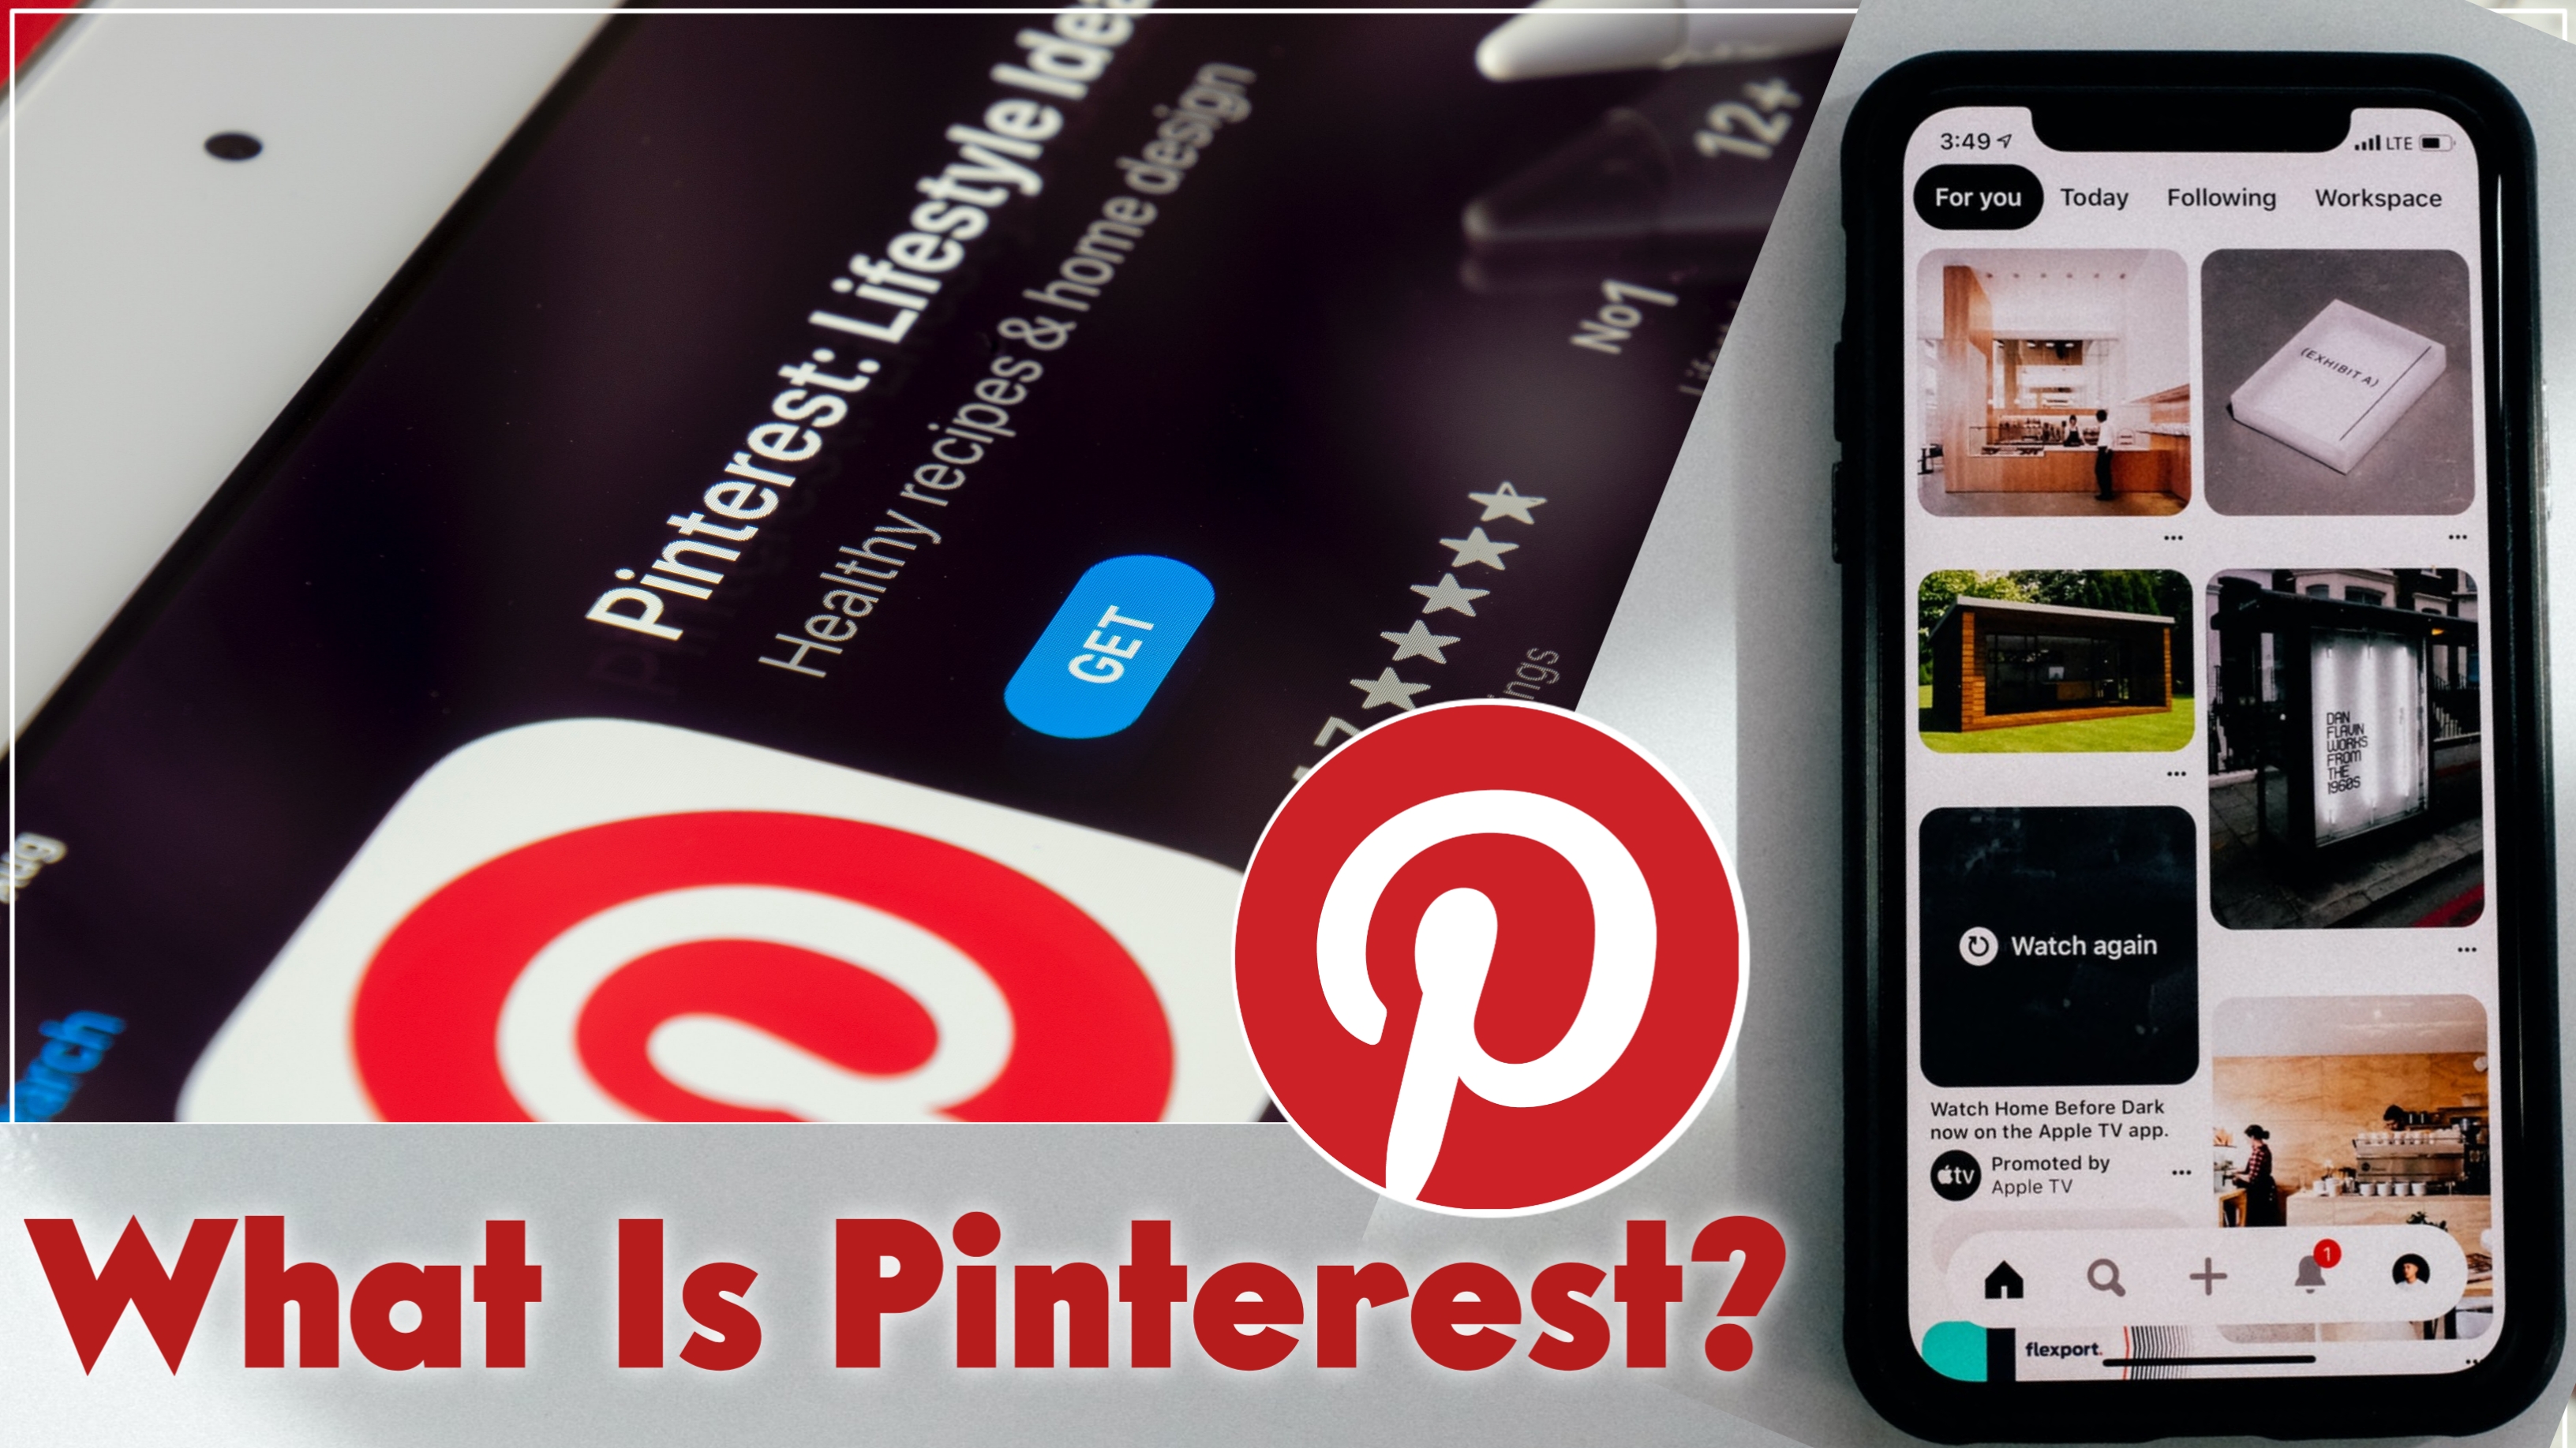 how to post on pinterest, save from pinterest, how to post on pinterest 2022, how to post on pinterest on android, how to post on pinterest website, how to post on pinterest using phone,